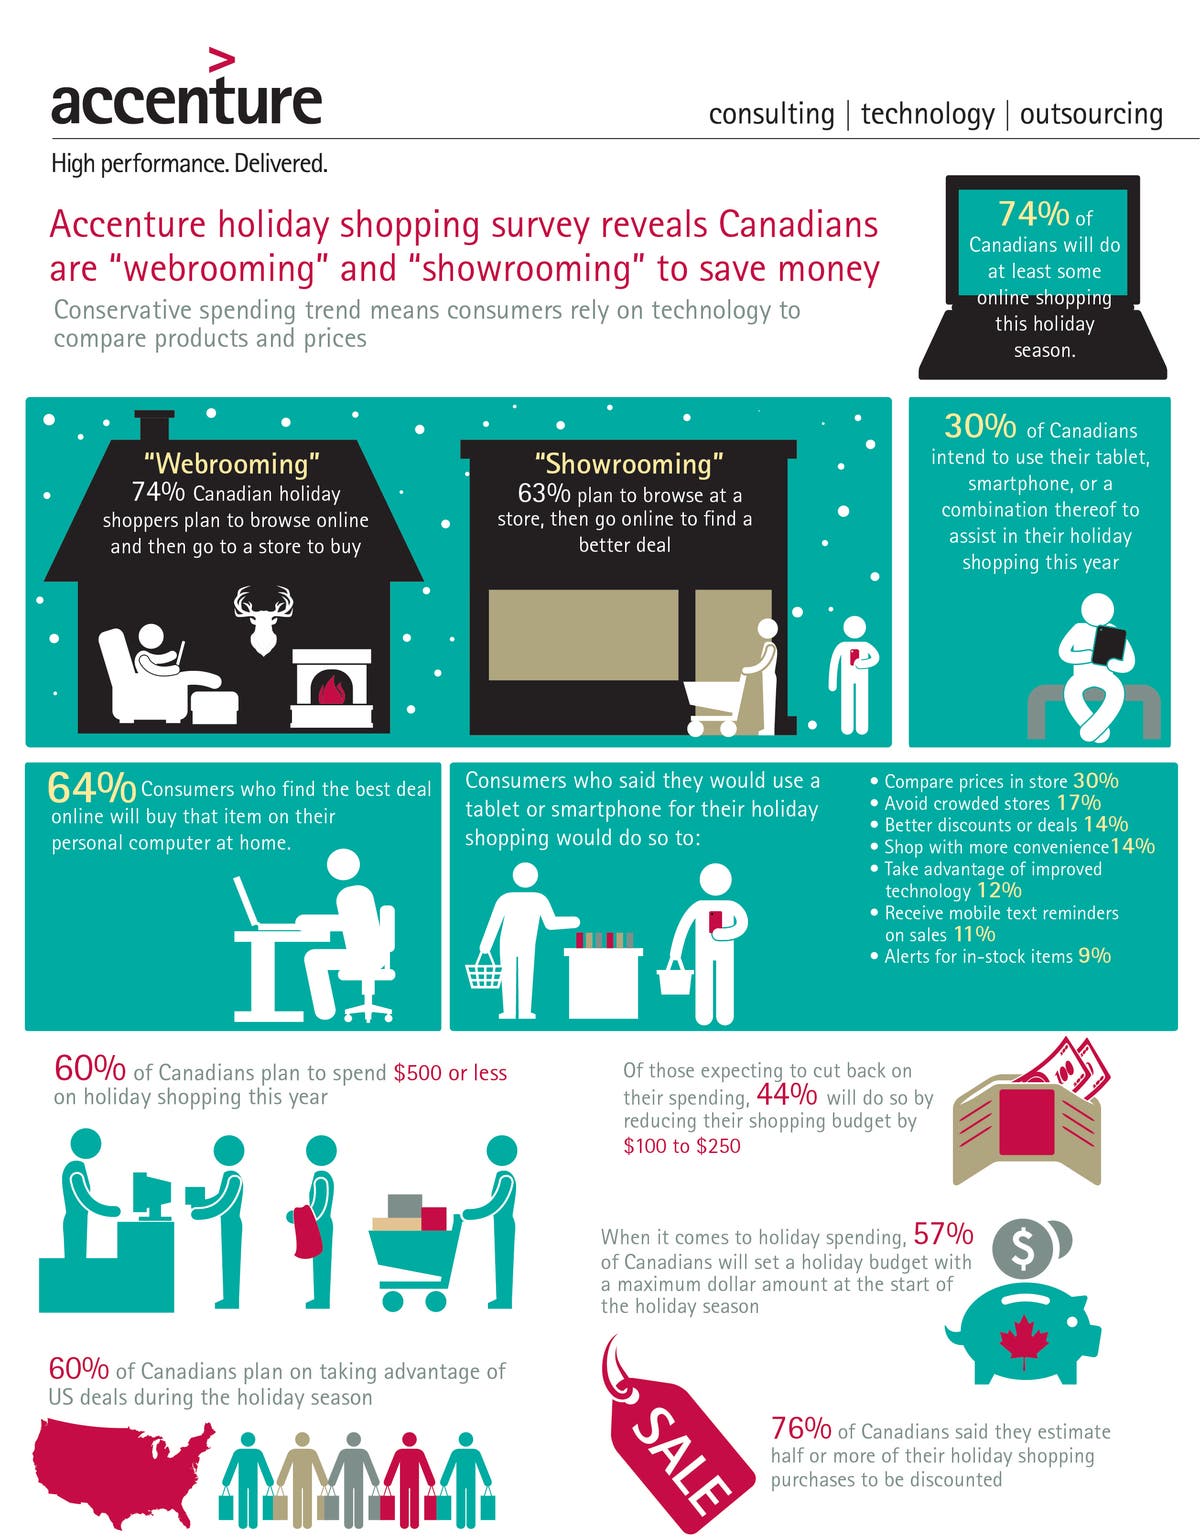 Accenture holiday shopping survey reveals Canadians are “webrooming